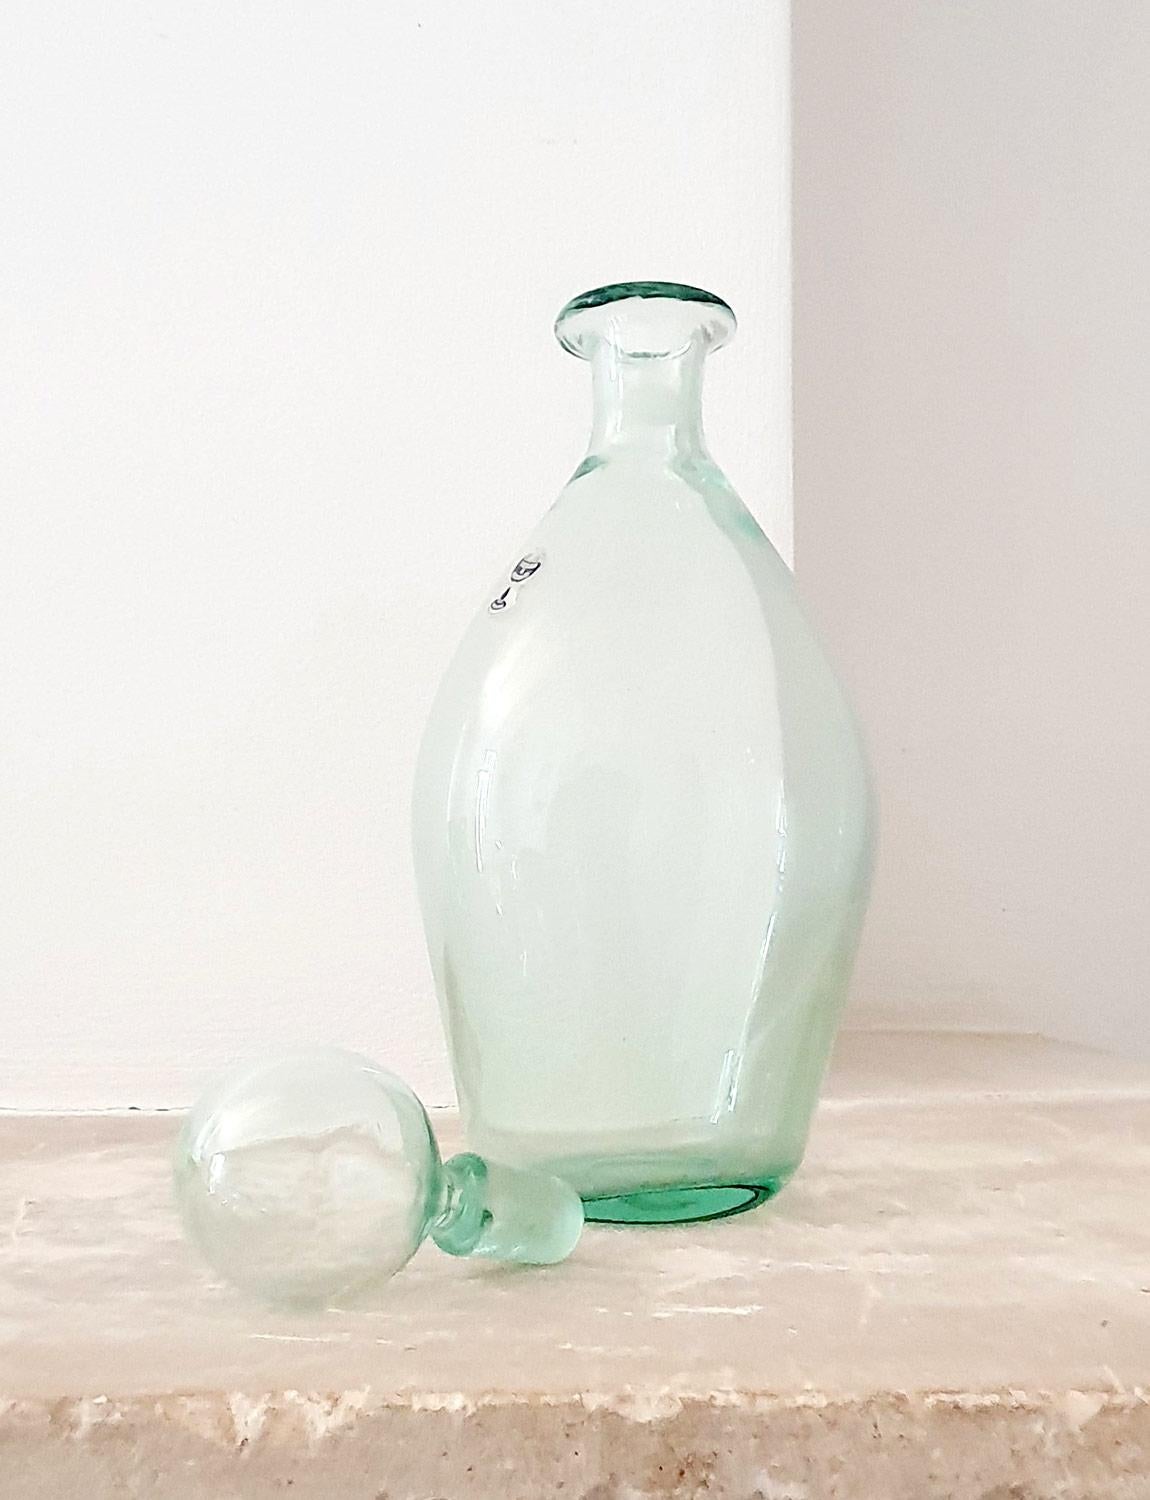 A beautifully light and clear pale green hand-blown bottle / decanter with hand-blown stopper by the Venetian furnace, Nason Moretti. The bottle still carries the Nason Moretti sticker. It is a beautiful piece in excellent condition.